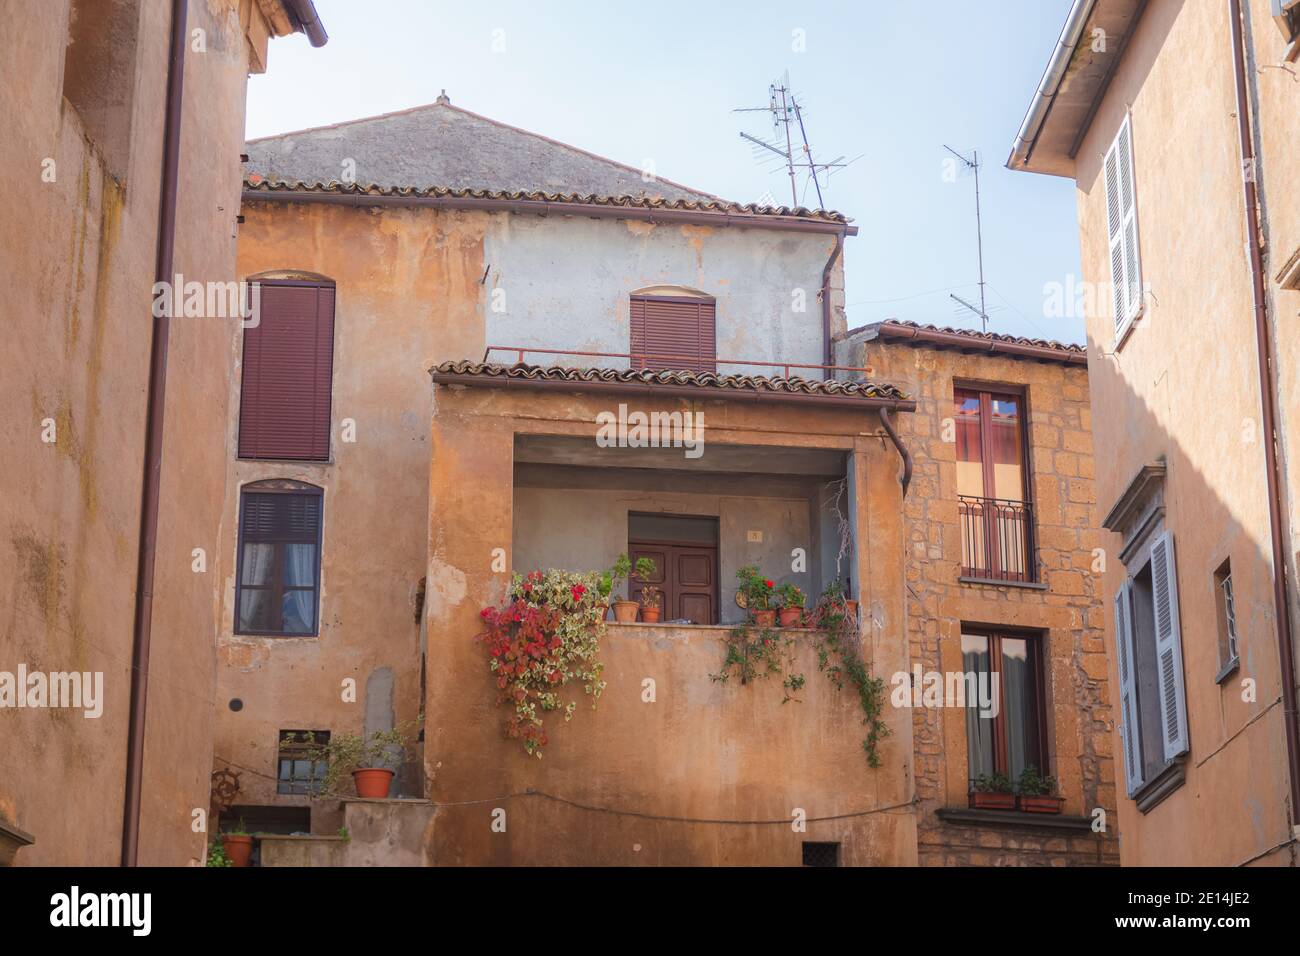 A charming old town home in the Etruscan hilltop village of Orvieto, Umbria in Italy. Stock Photo